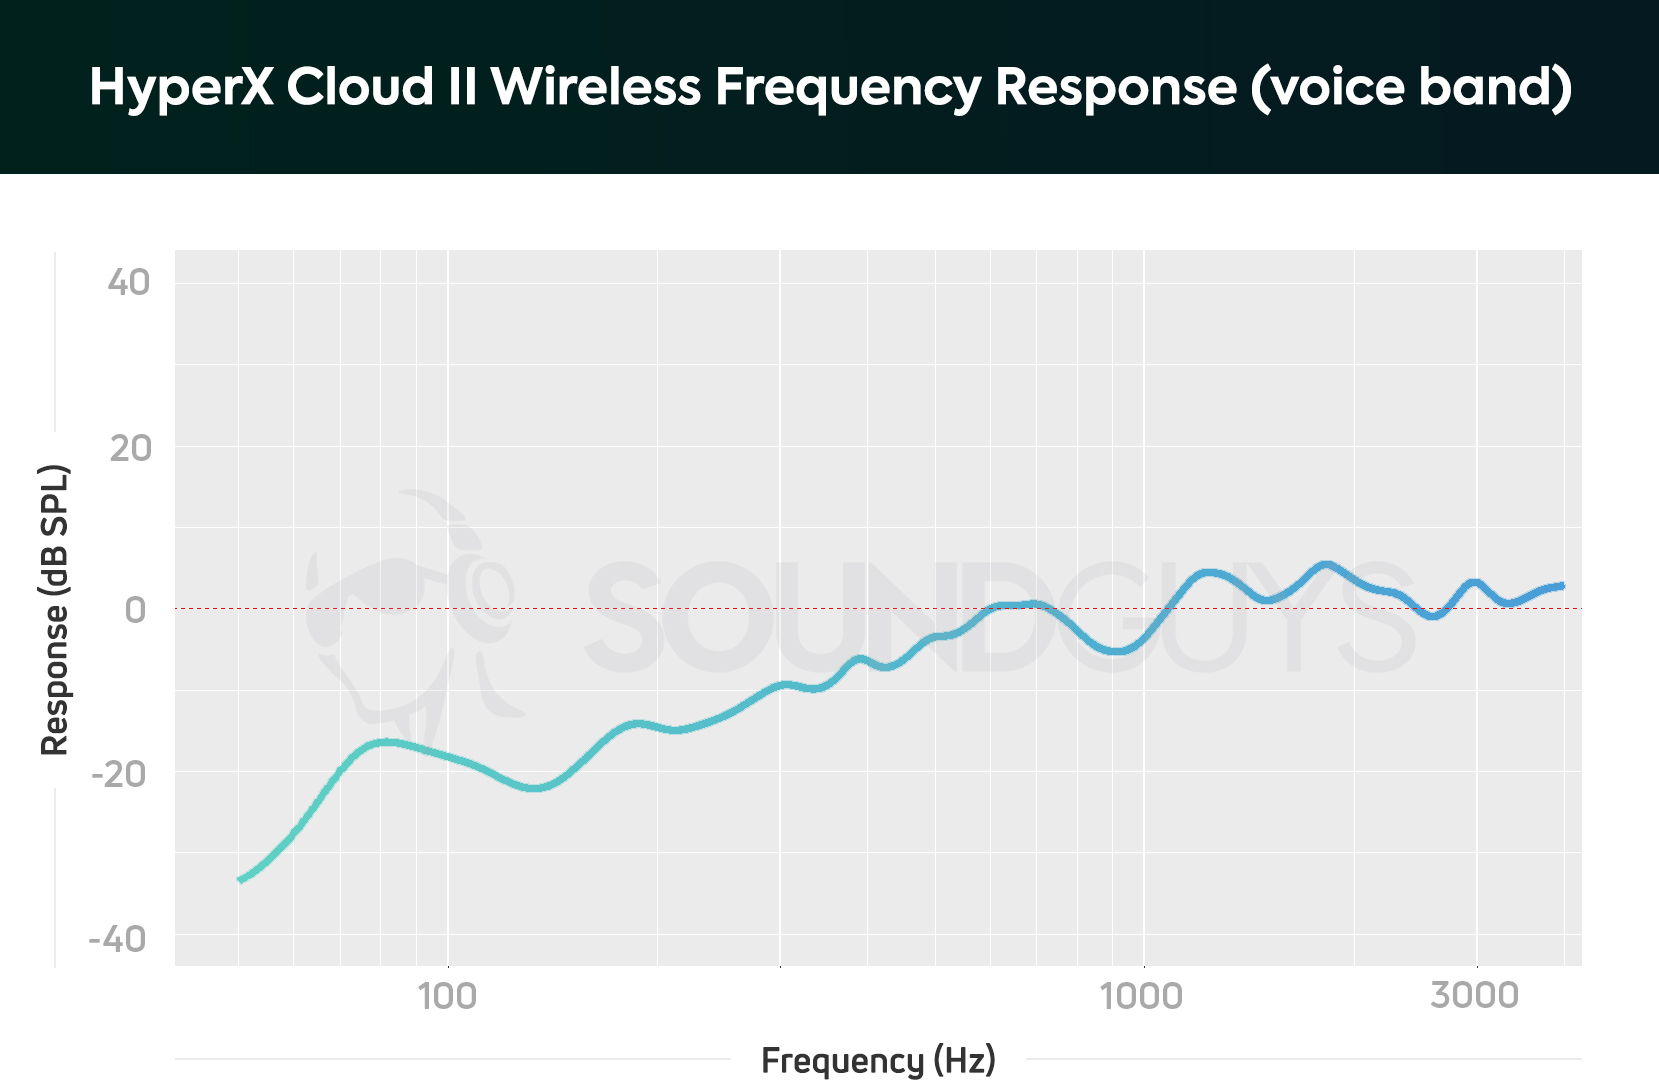 A frequency response for the HyperX Cloud II Wireless, which shows under-emphasized bass response.